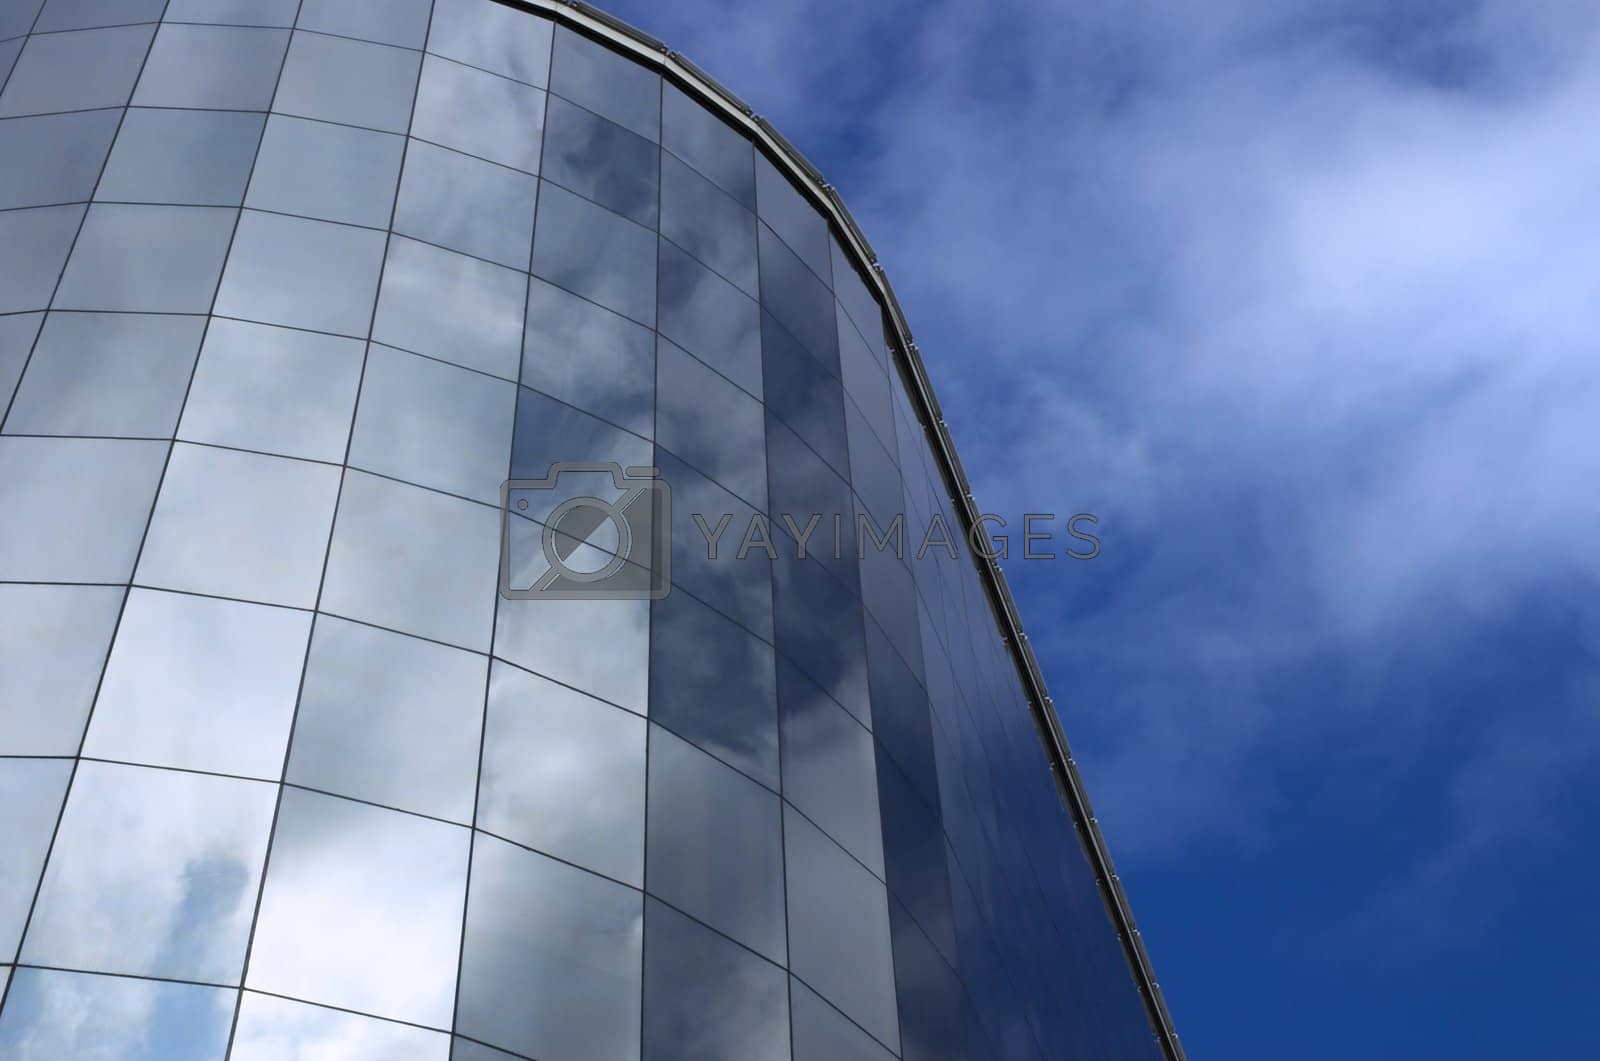 Royalty free image of modern building and sky reflection by Kuzma